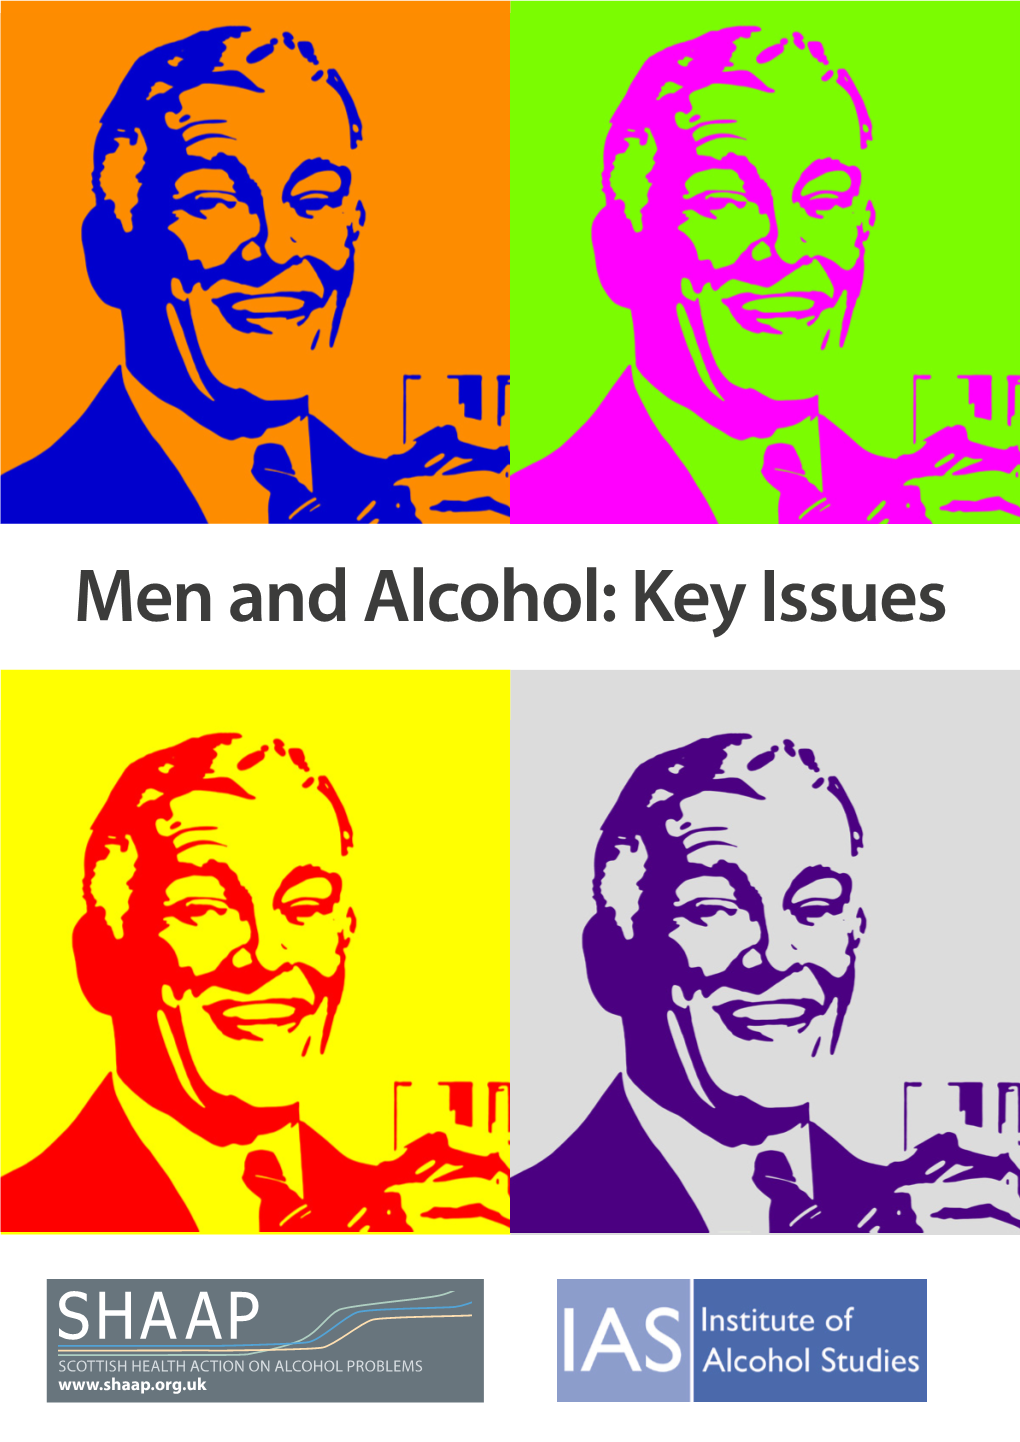 Men and Alcohol: Key Issues